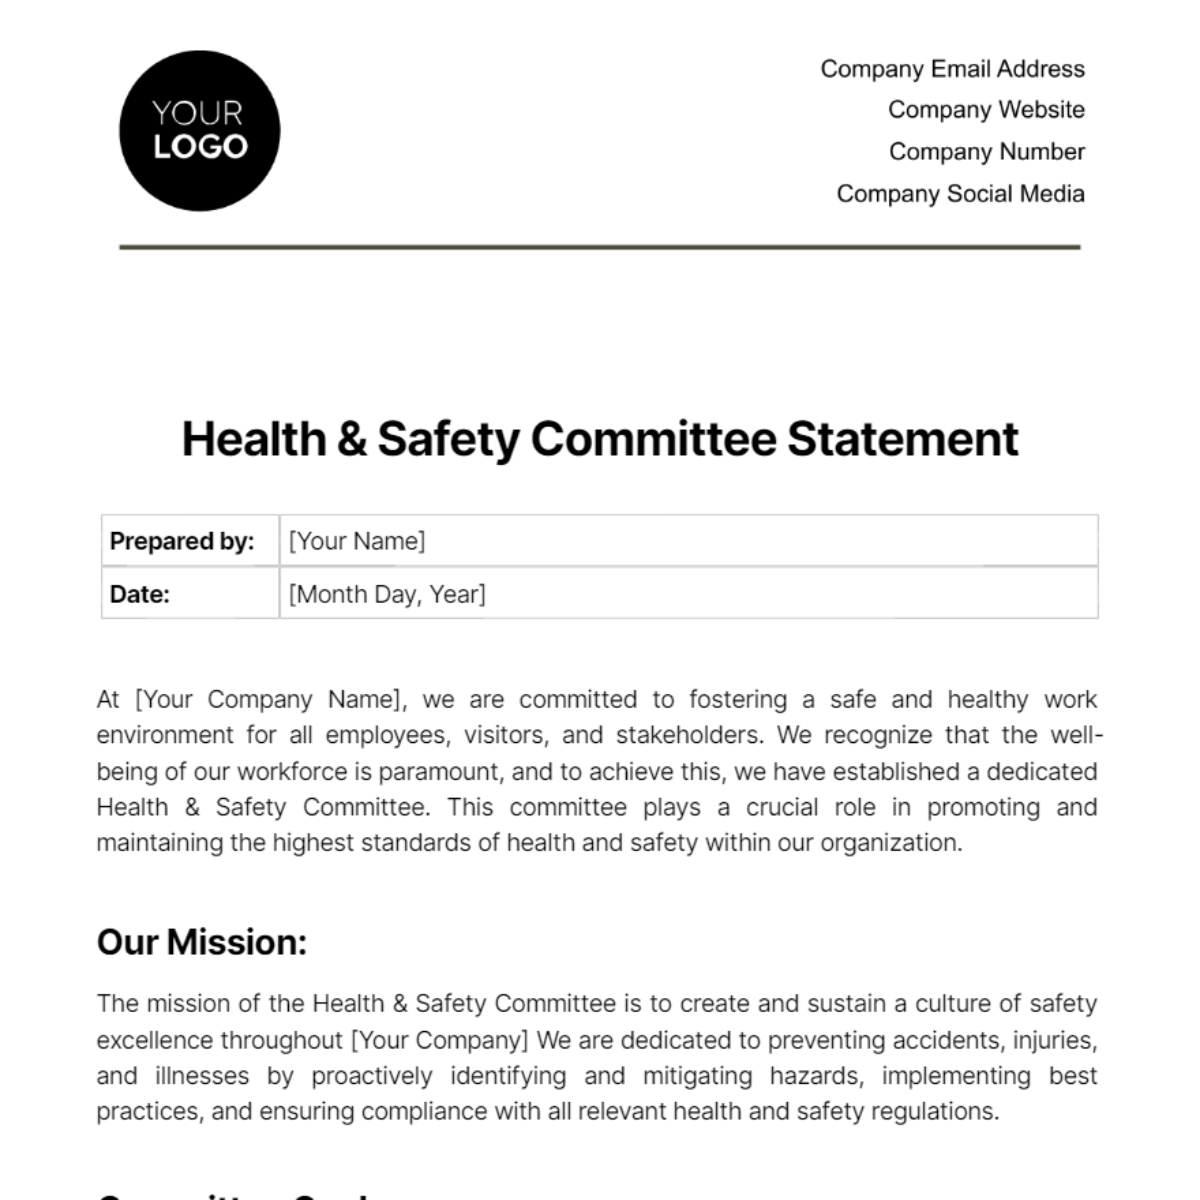 Health & Safety Committee Statement Template